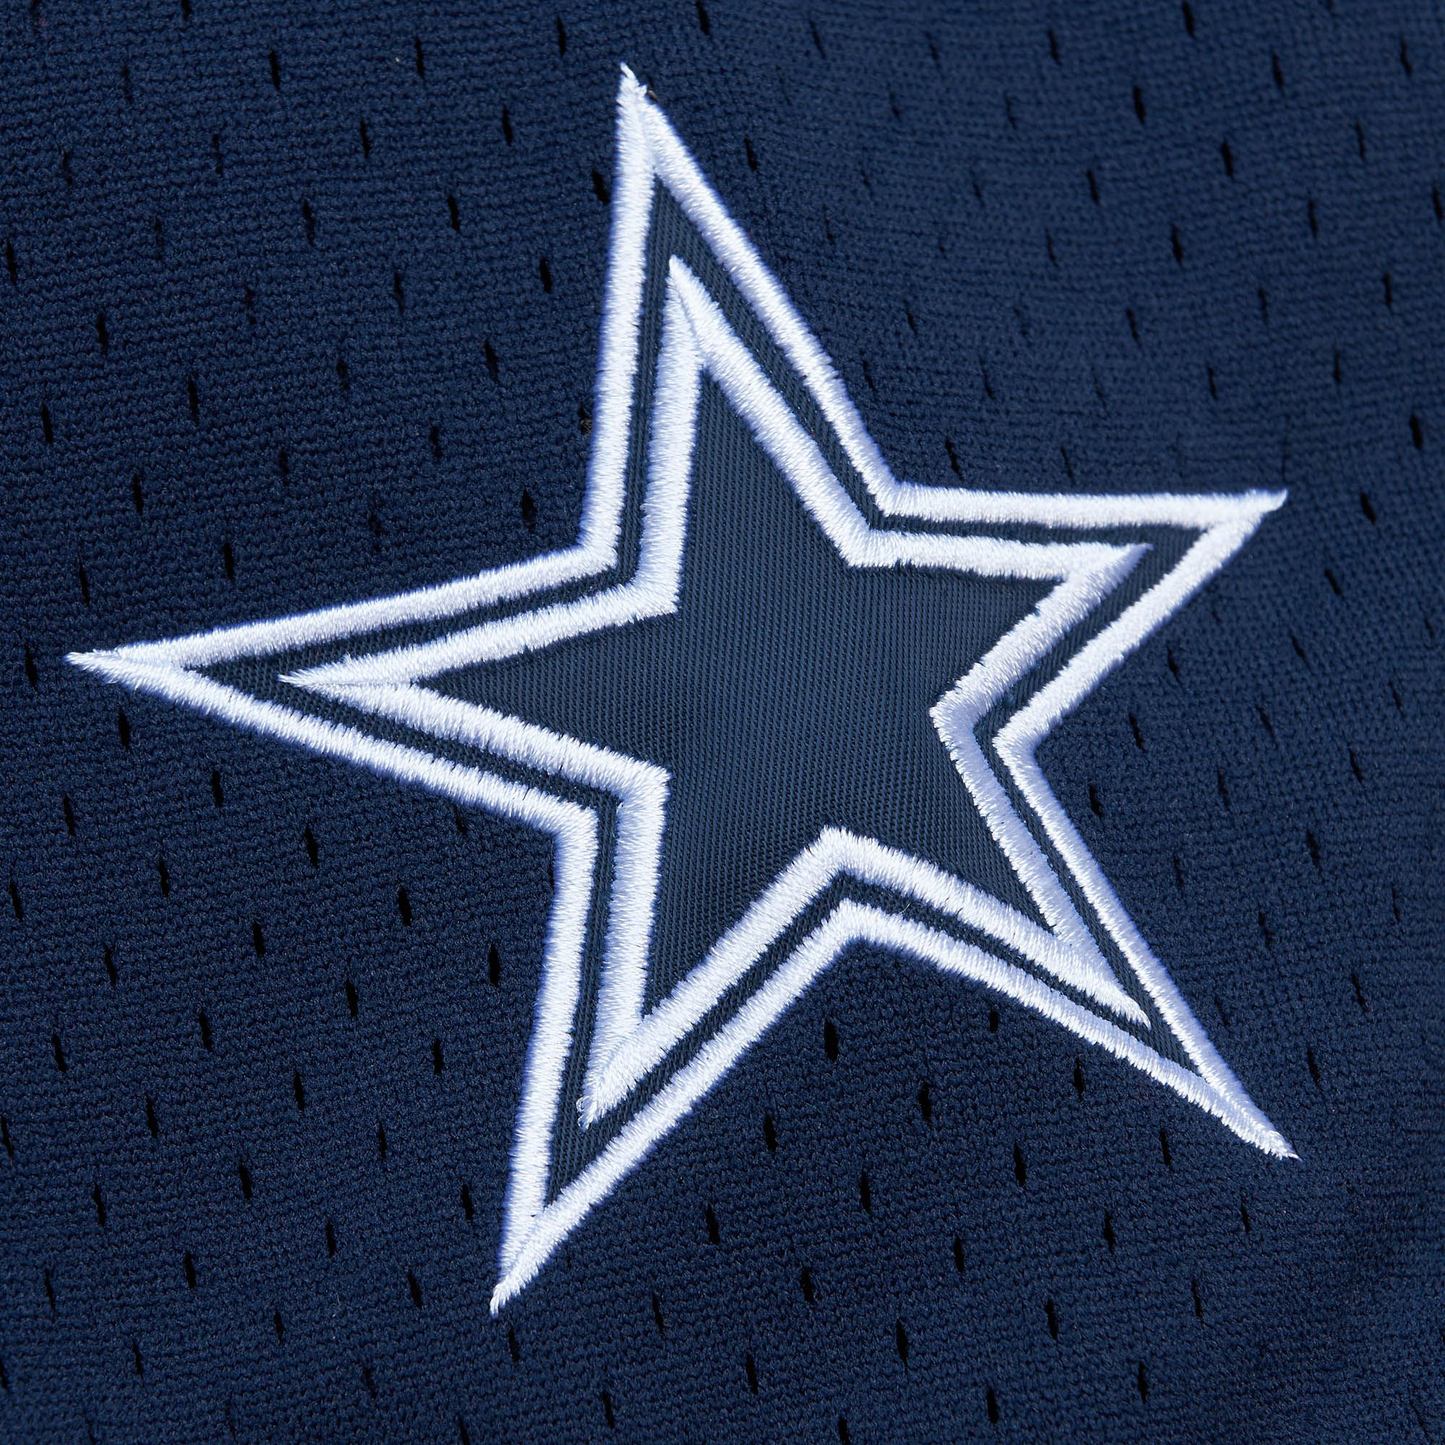 DALLAS COWBOYS MEN'S MITCHELL & NESS ON THE CLOCK MESH JERSEY